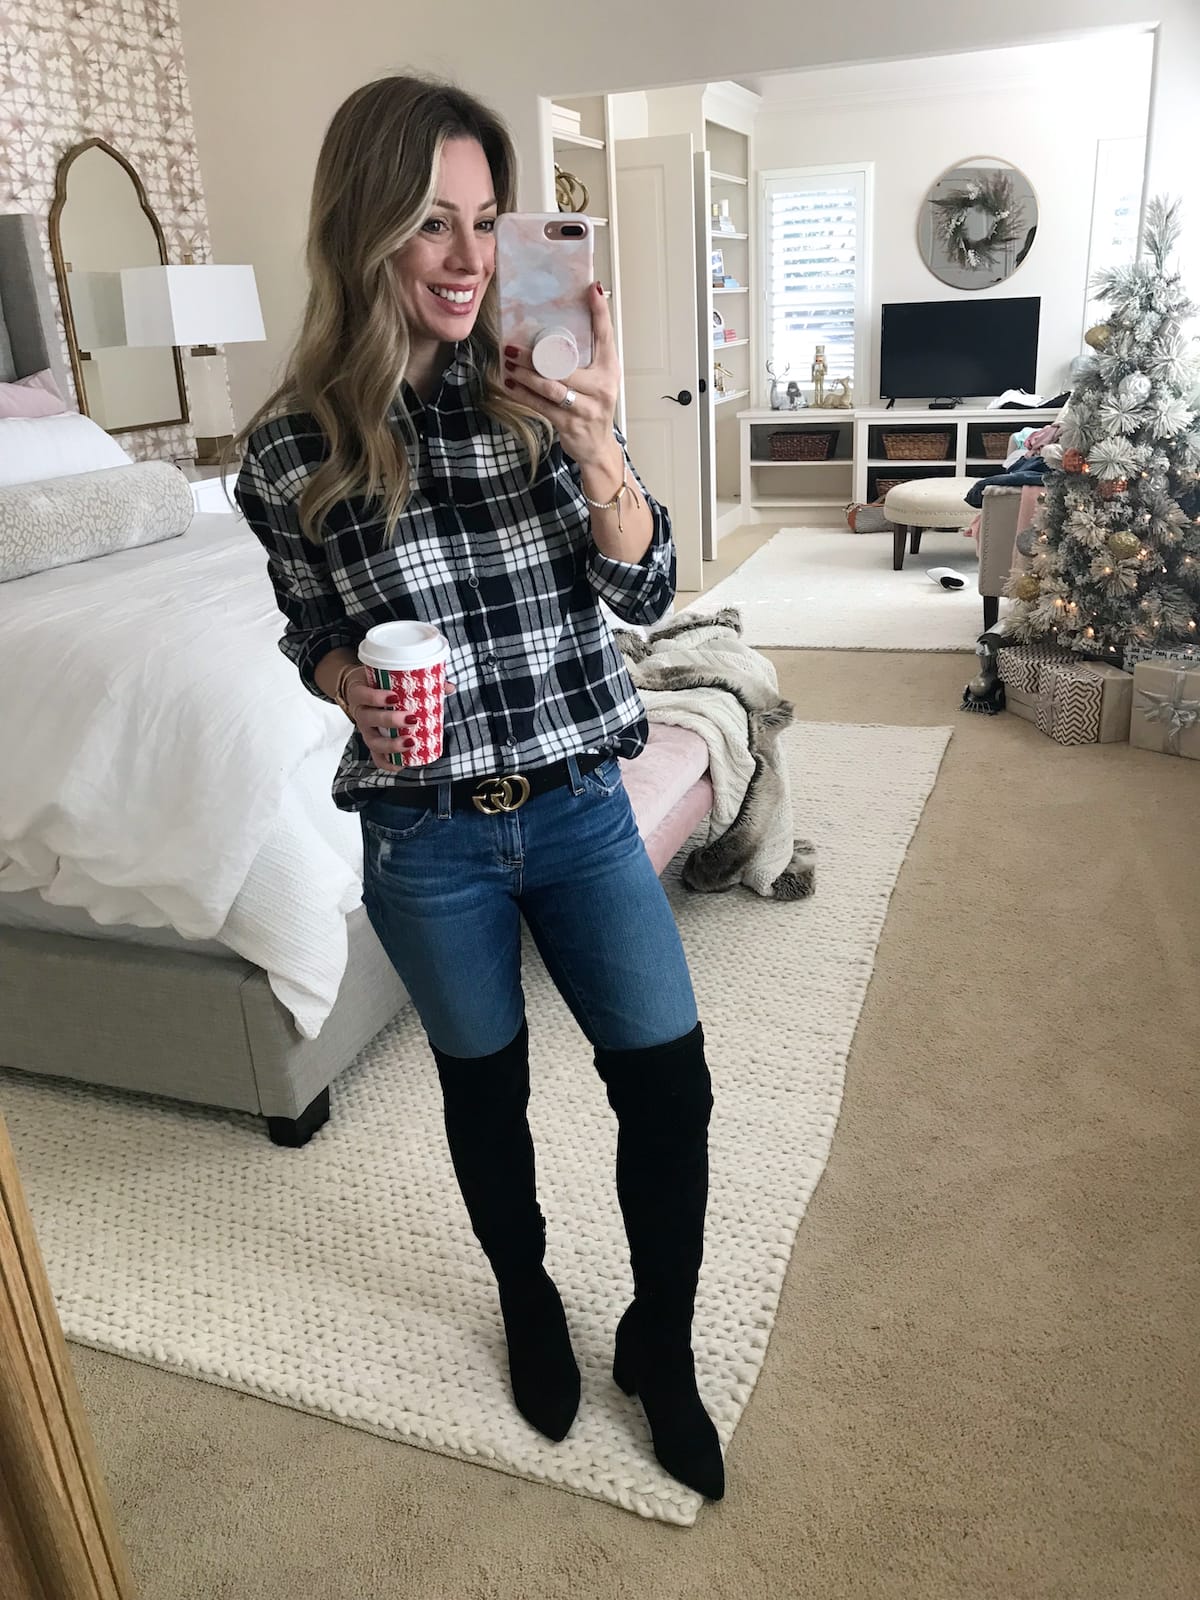 Amazon Fashion Haul - jeans and plaid button down top with OTK boots